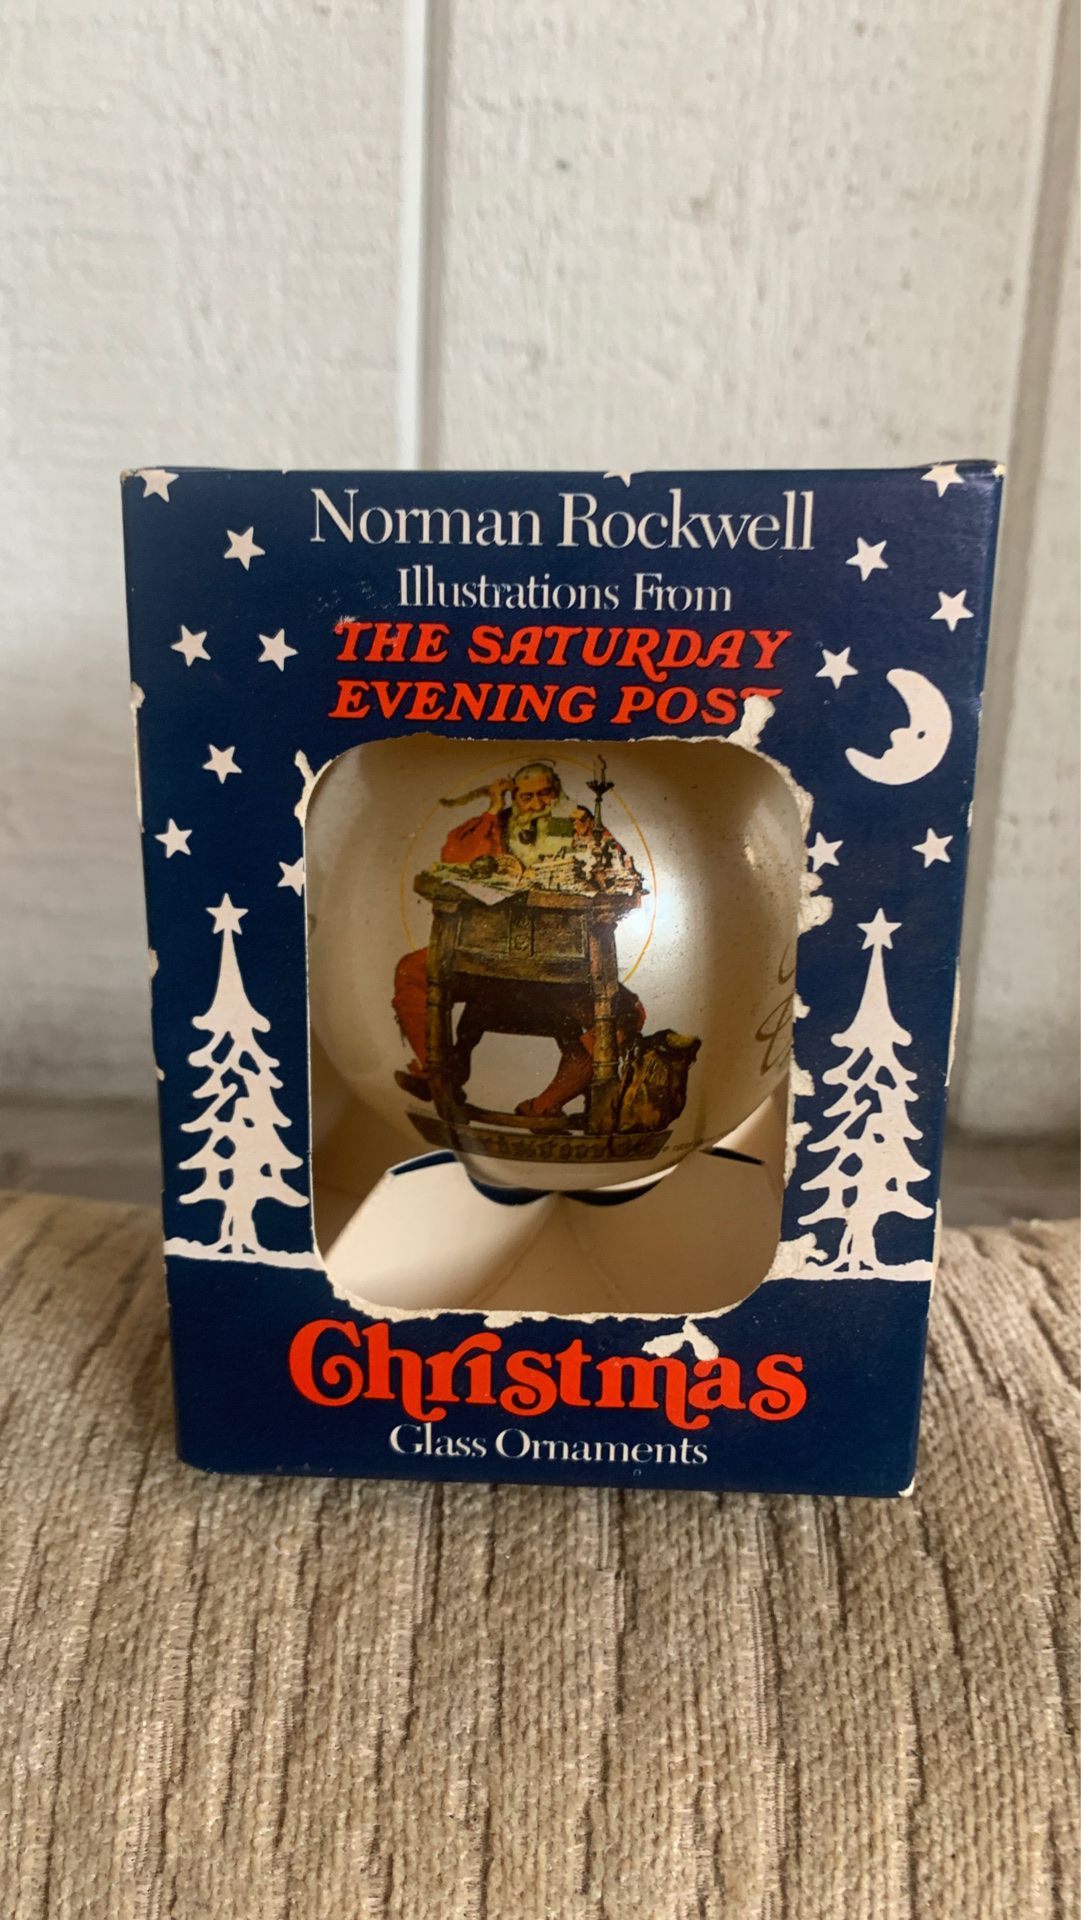 1935 NORMAN ROCKWELL glass ornament/ never out of box, like new